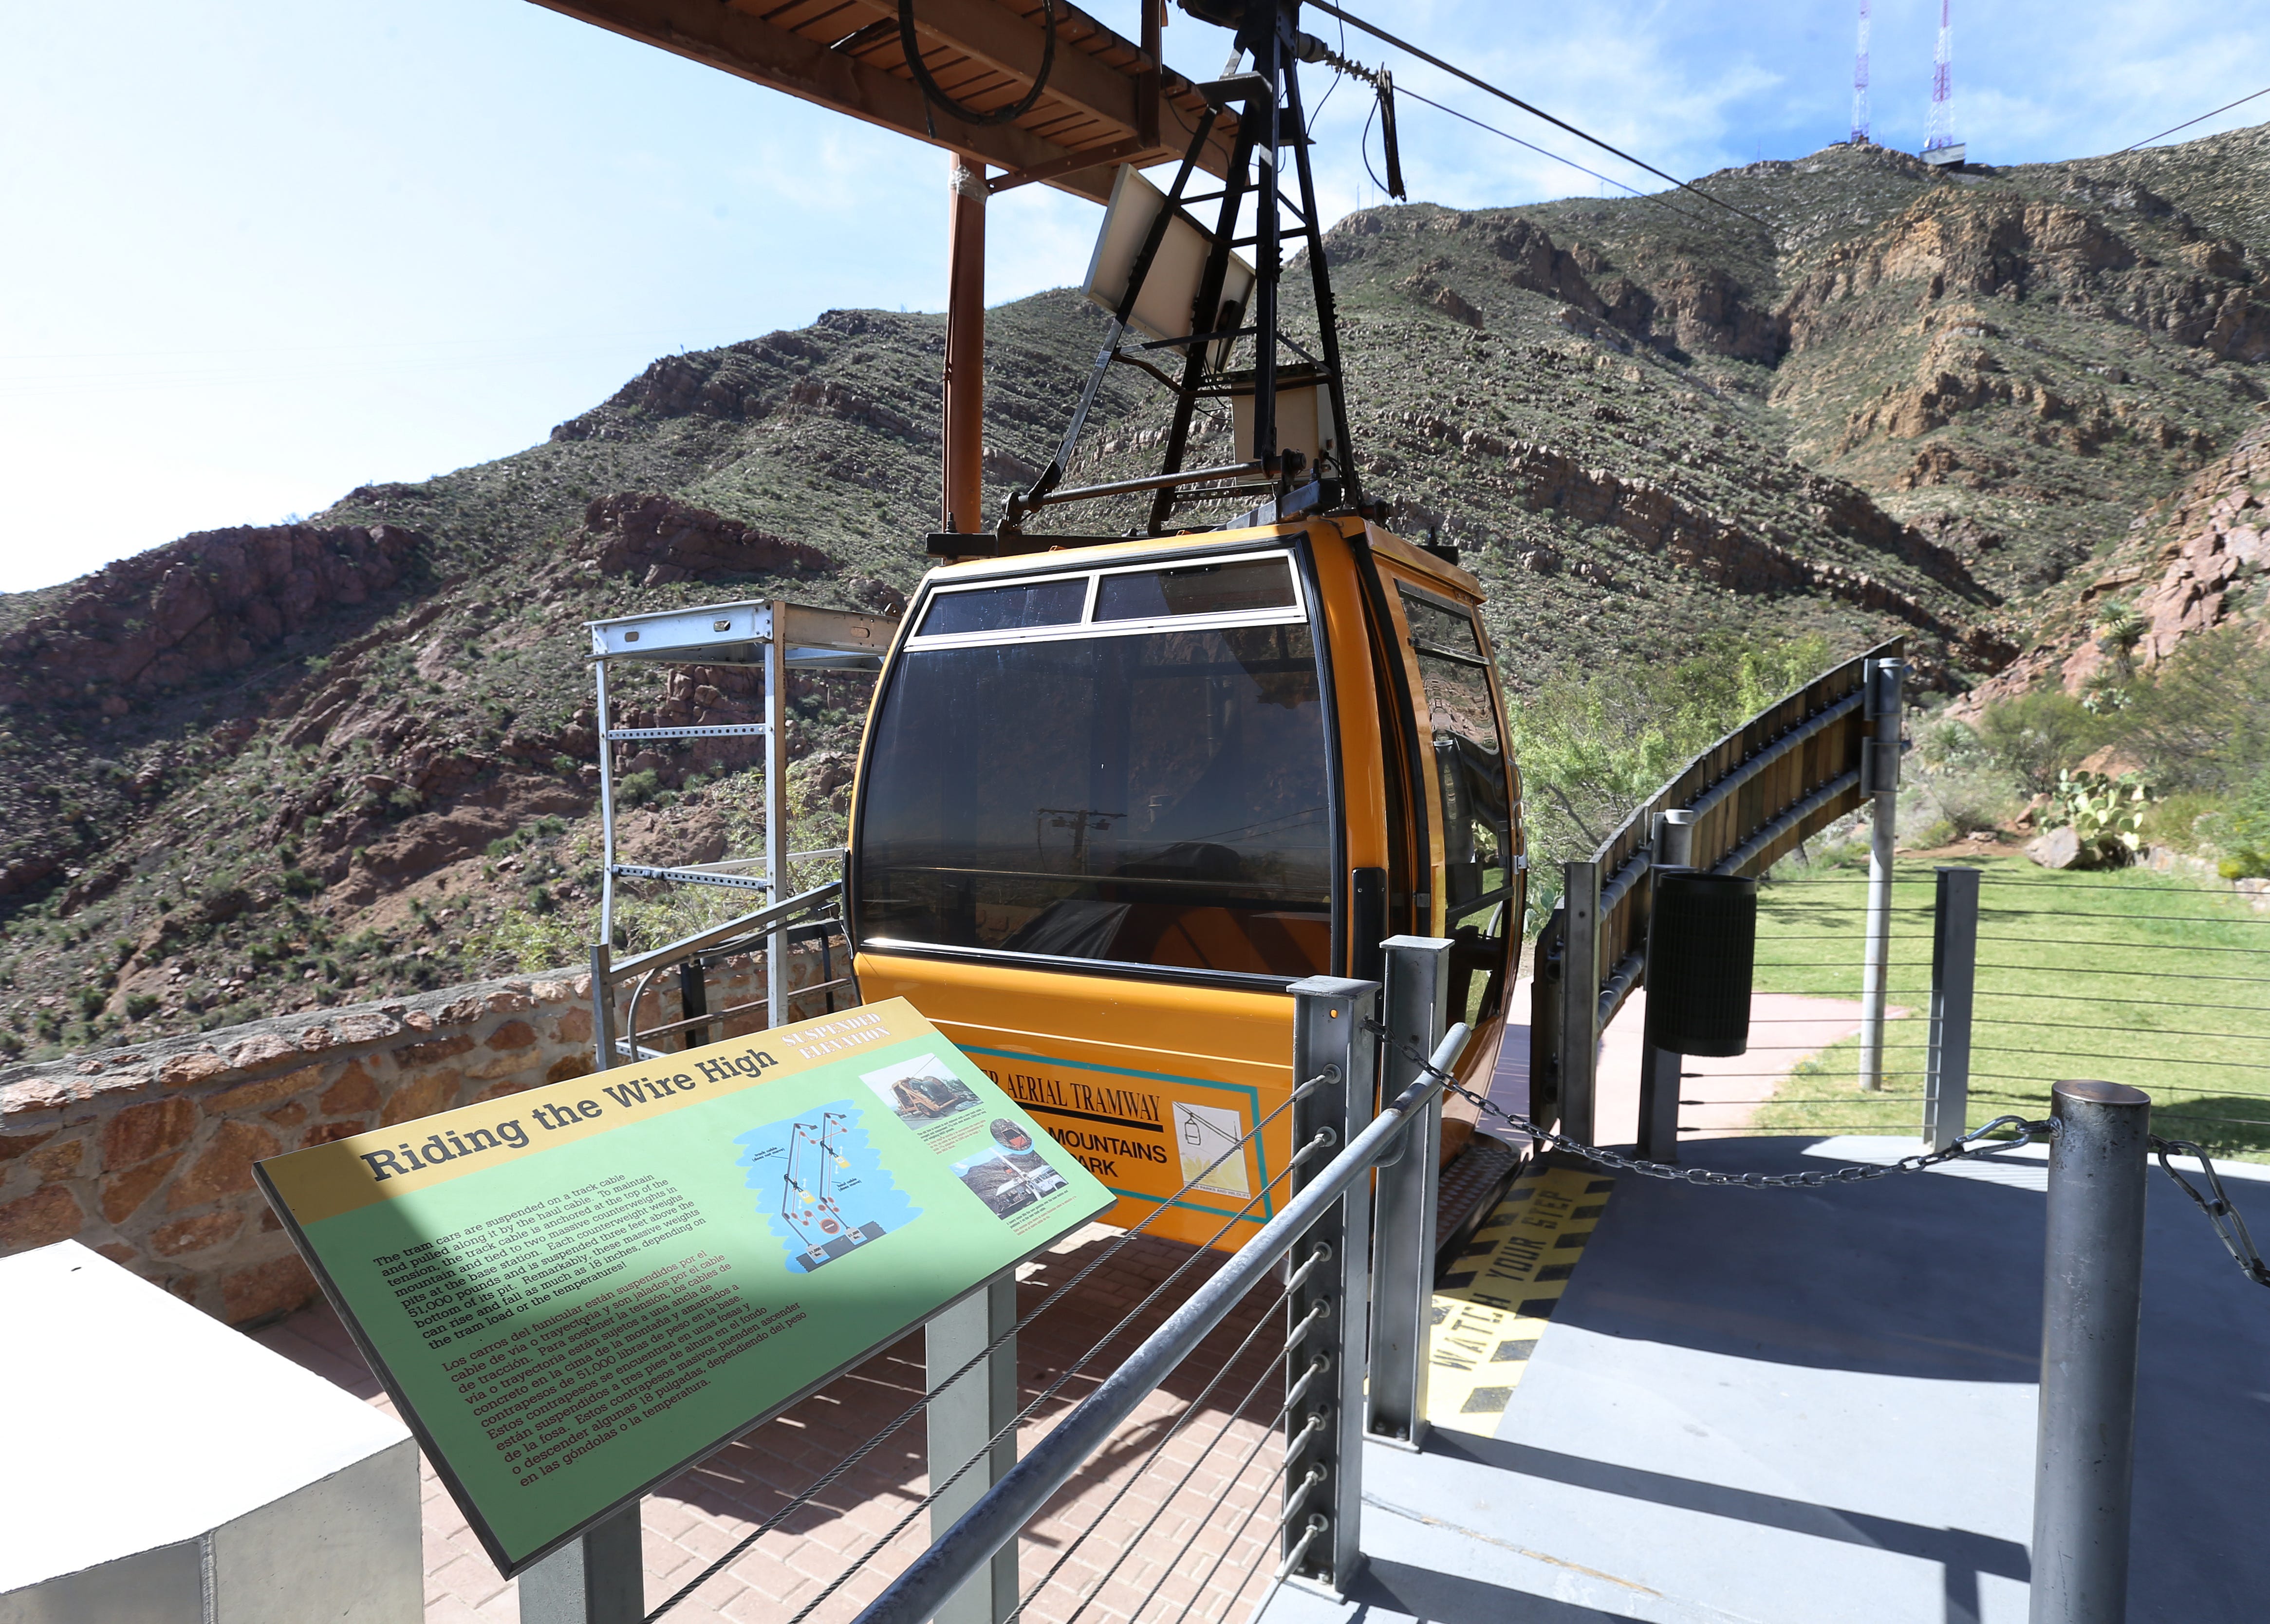 Wyler Aerial Tramway in El Paso could restart under bill approved in Texas House